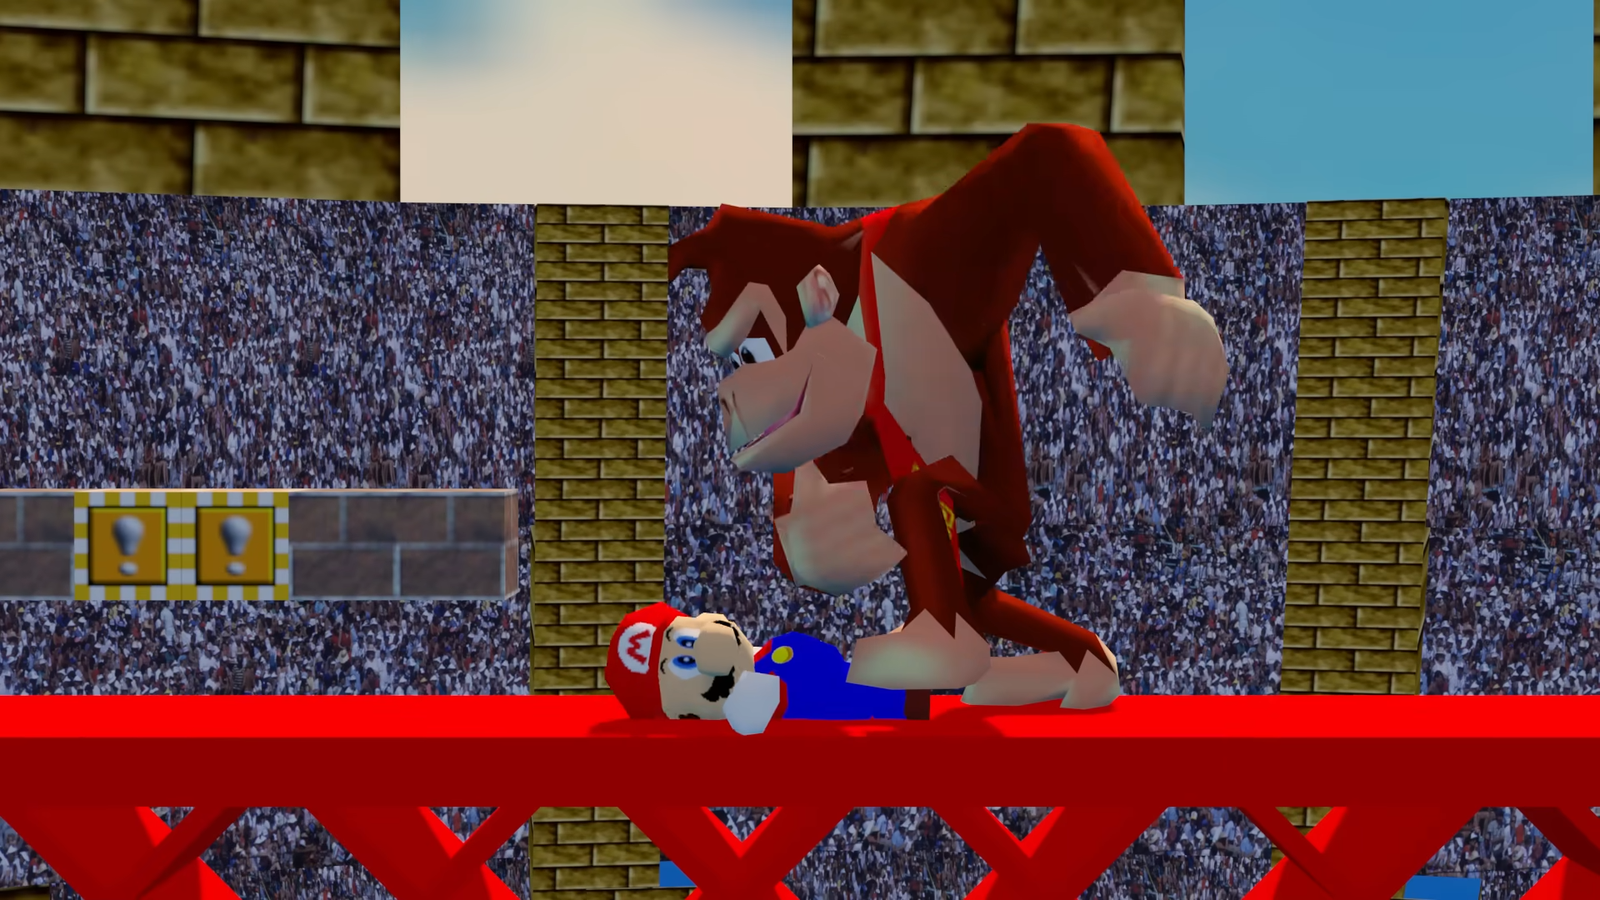 Here's The Super Mario Movie with N64 graphics | Eurogamer.net